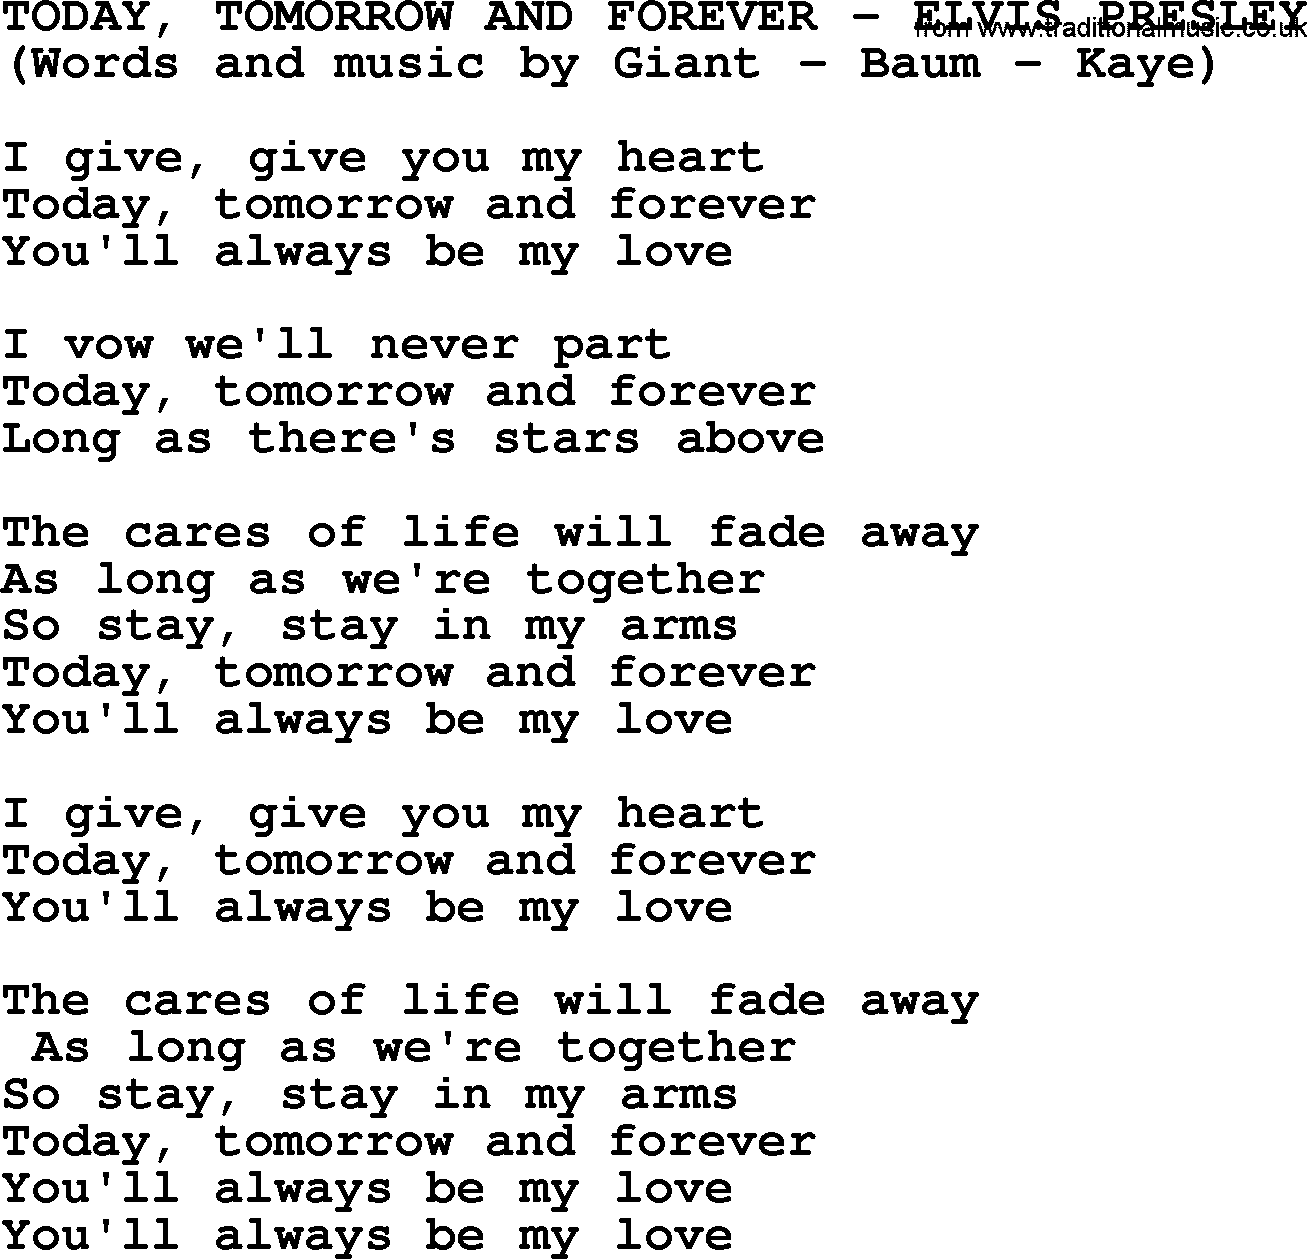 Elvis Presley song: Today, Tomorrow And Forever lyrics